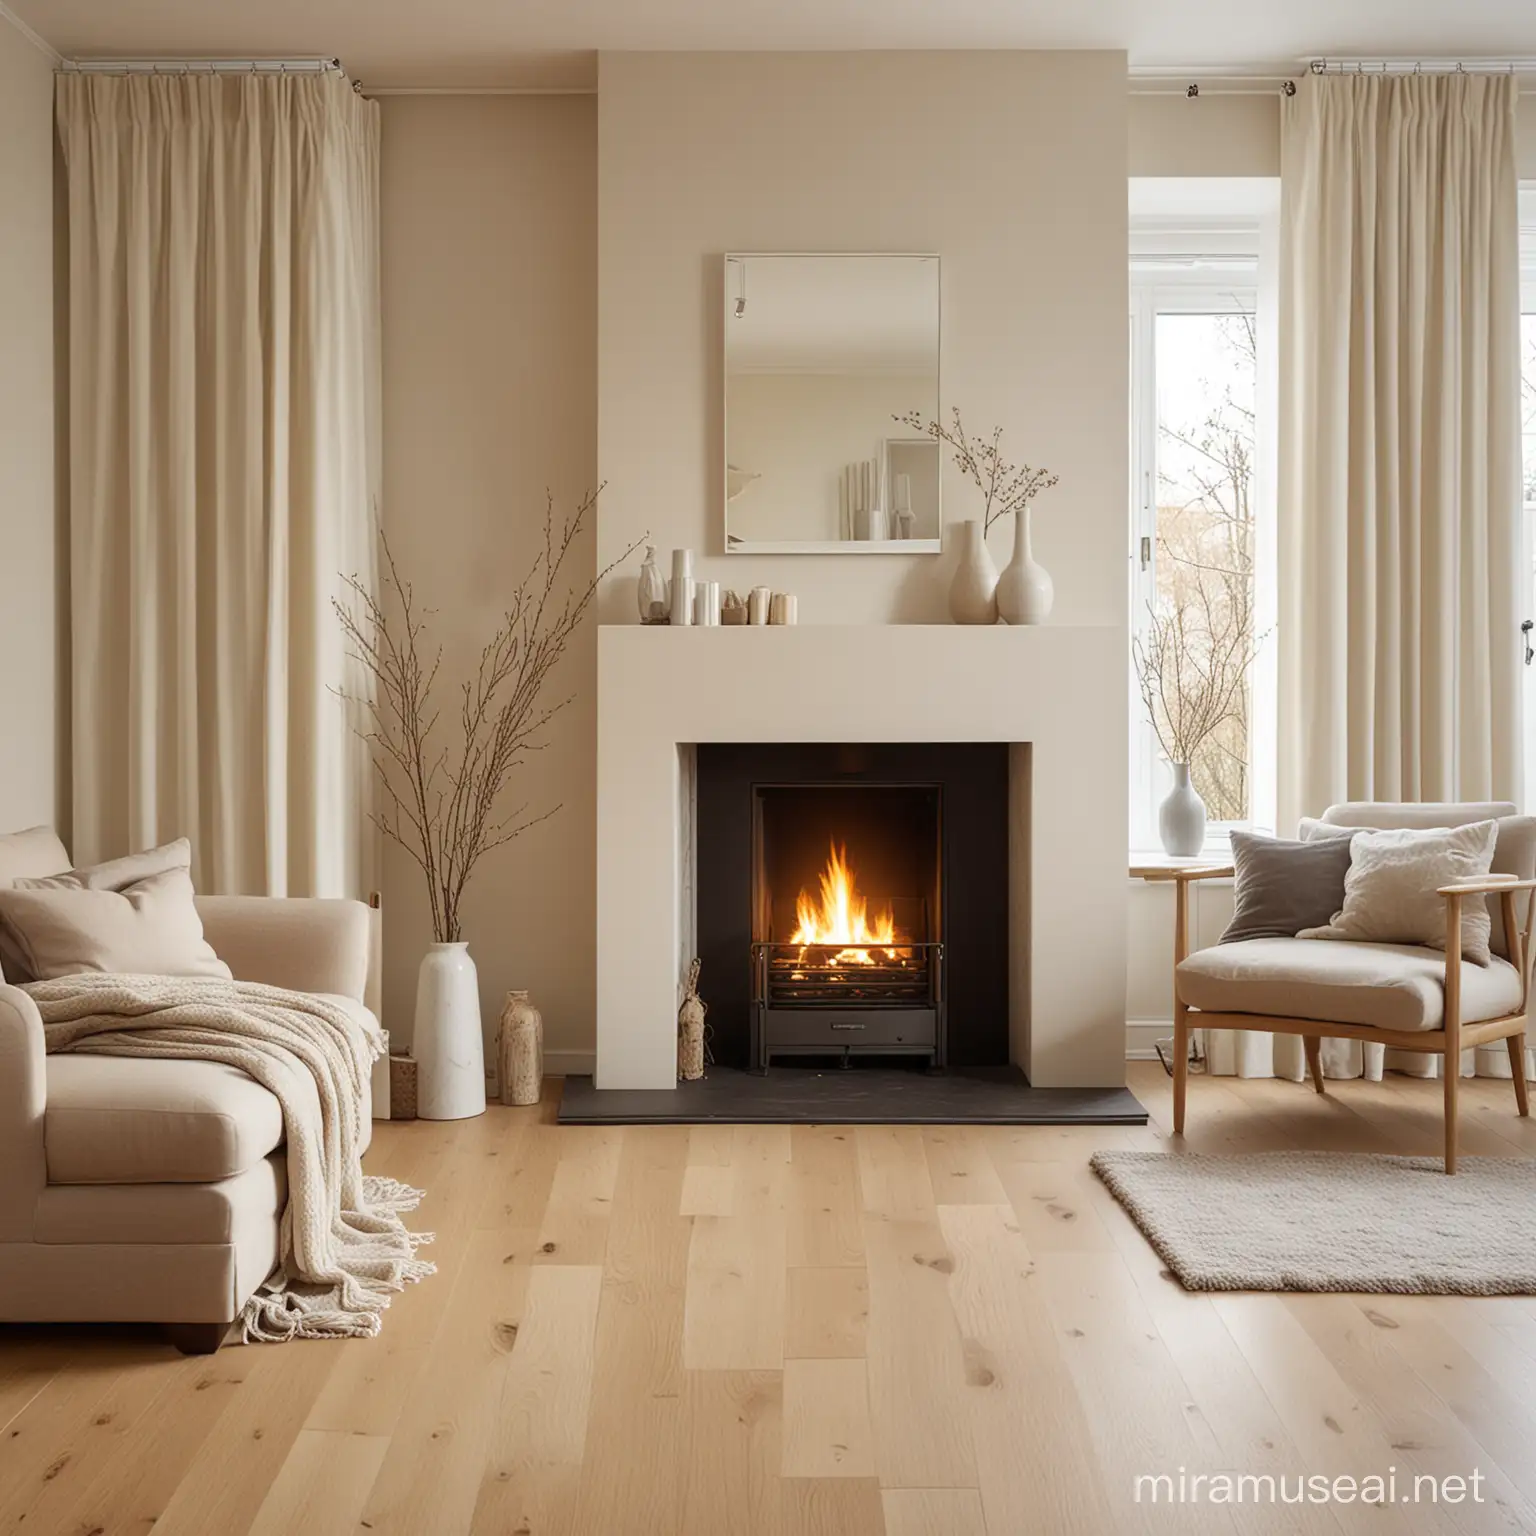 amazing living room, Scandinavian style, warm light, soft, fire place, oak floor, marble, cream curtains, twigs in vase, 